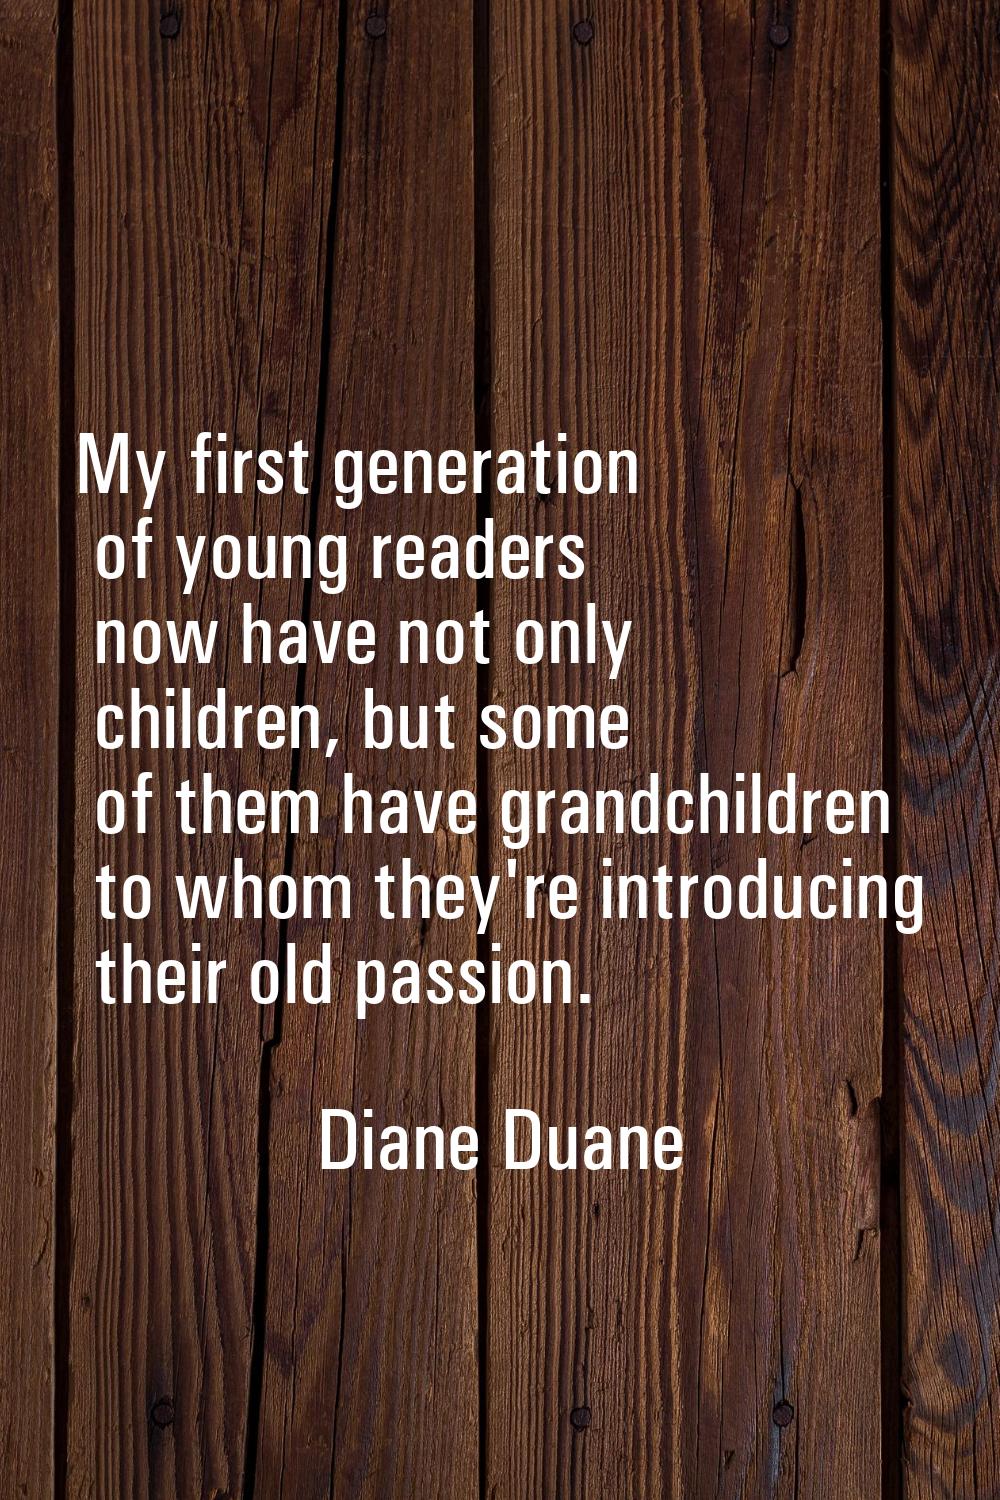 My first generation of young readers now have not only children, but some of them have grandchildre